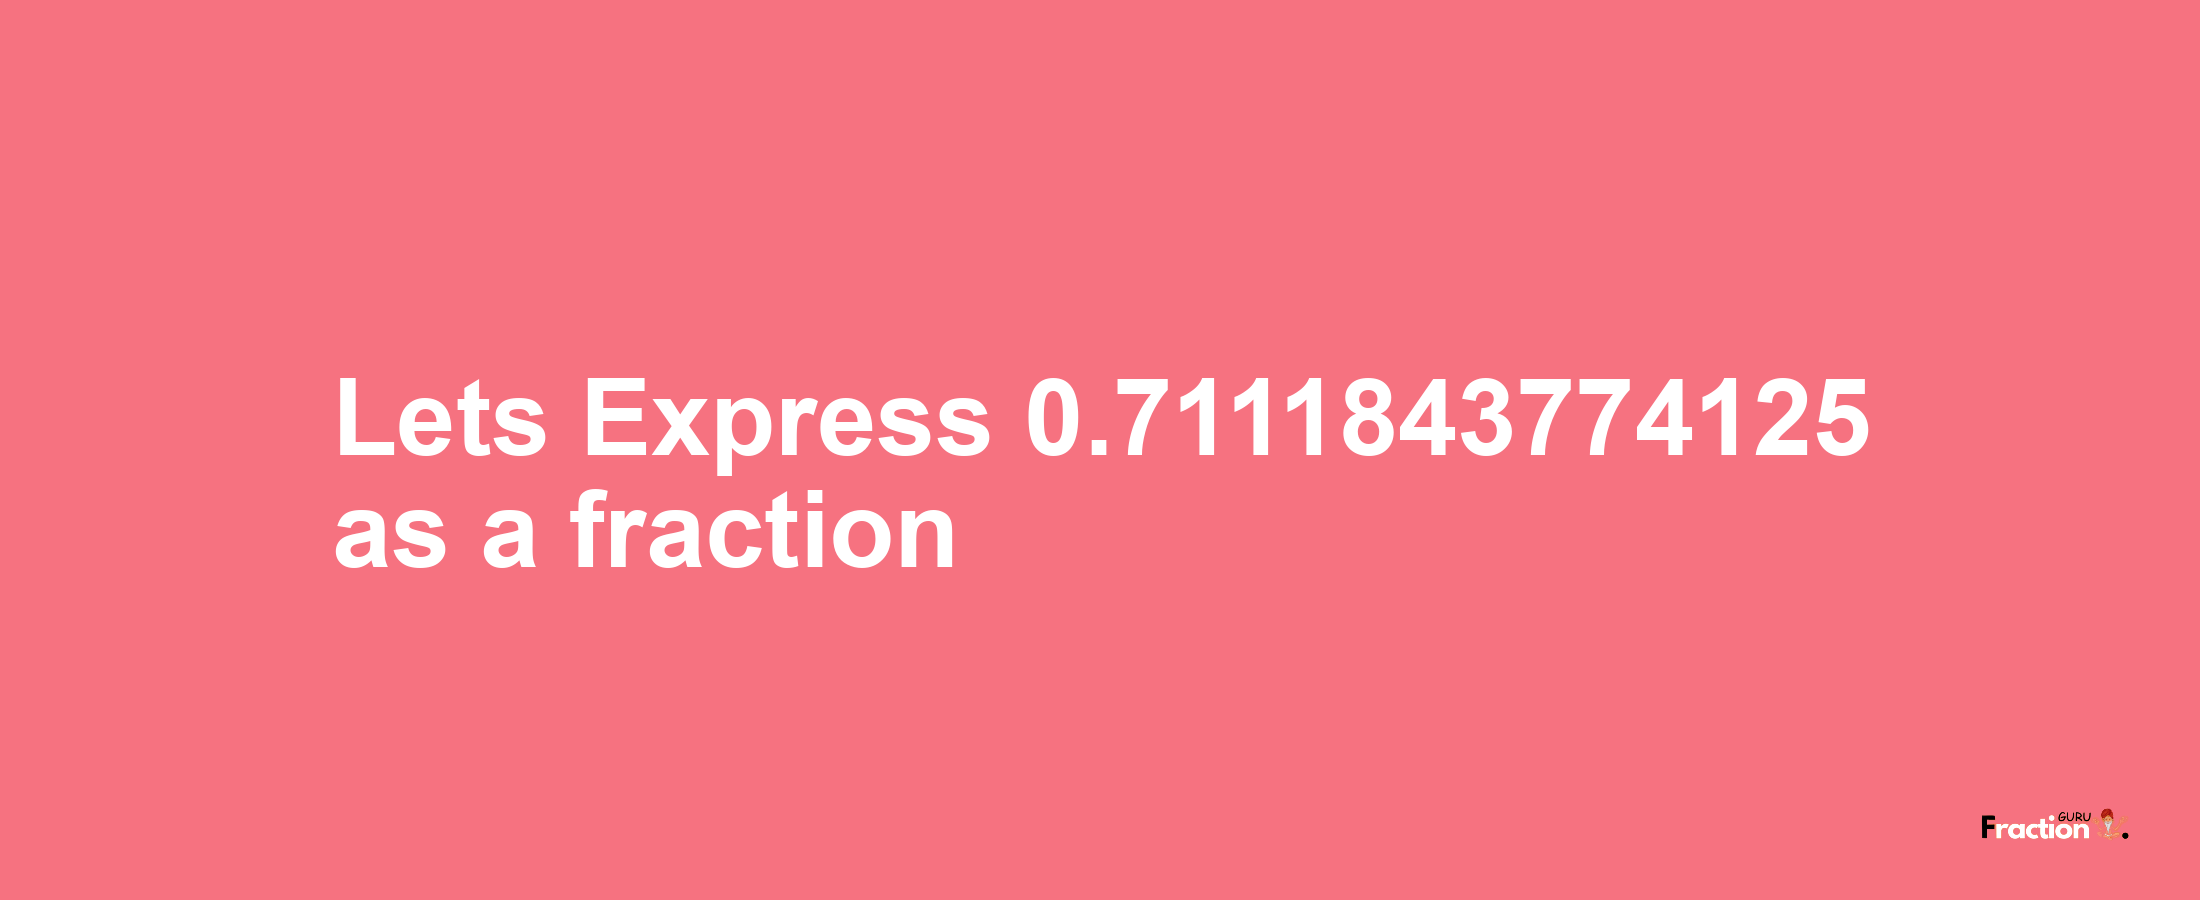 Lets Express 0.7111843774125 as afraction